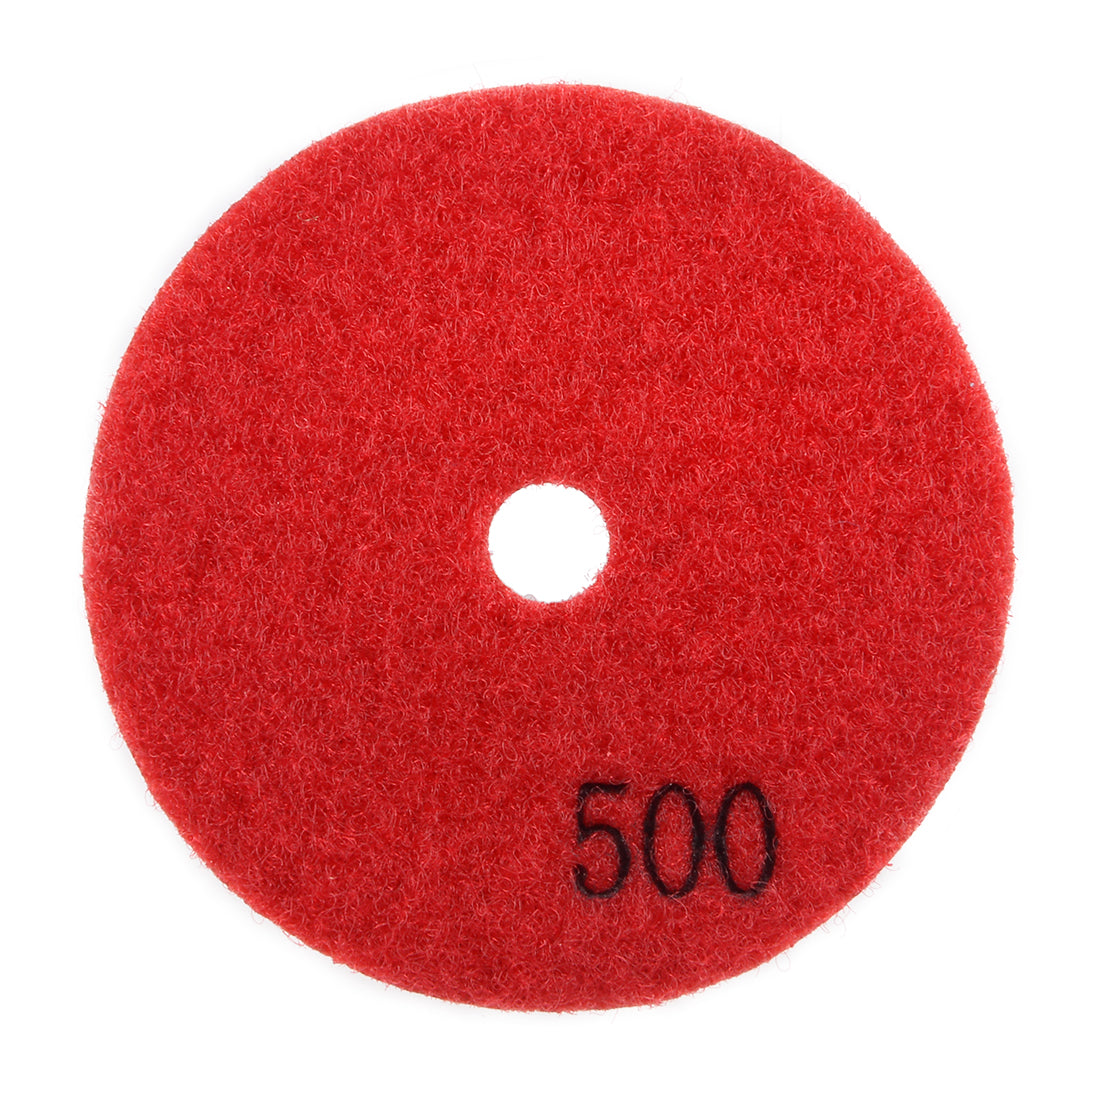 uxcell Uxcell Diamond Polishing Sanding Grinding Pads Discs 3 Inch Grit 500 10 Pcs for Granite Concrete Stone Marble